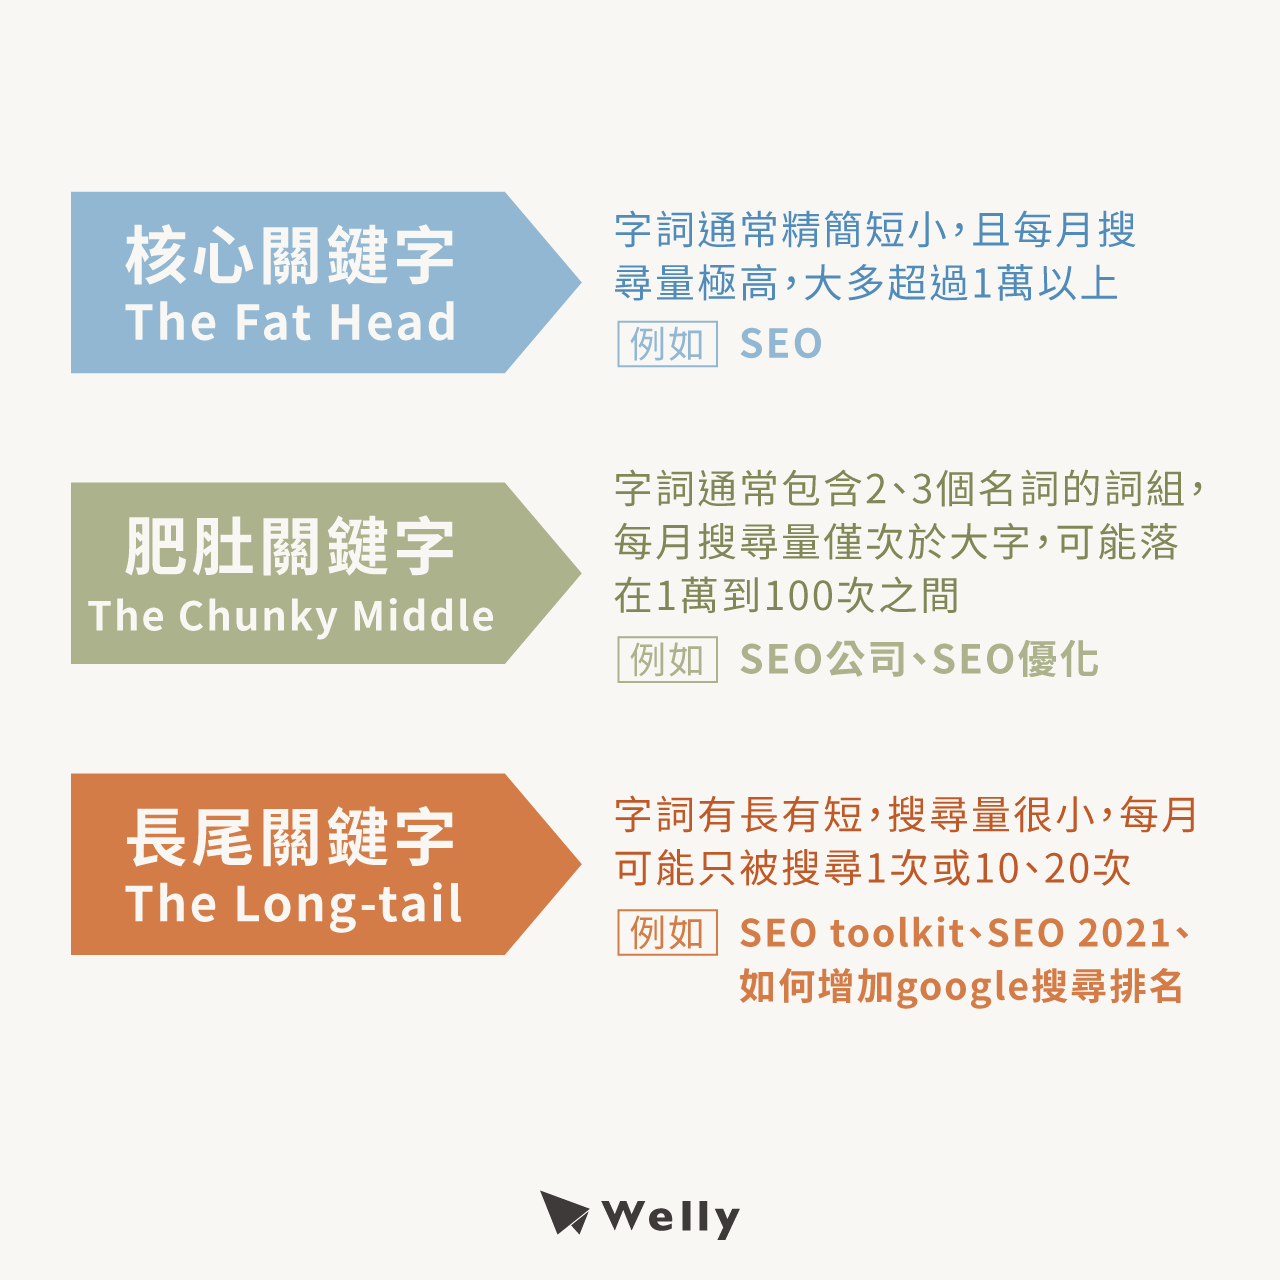 The Fat Head（核心關鍵字）、The Chunky Middle（肥肚關鍵字）、The Long-tail（長尾關鍵字）介紹